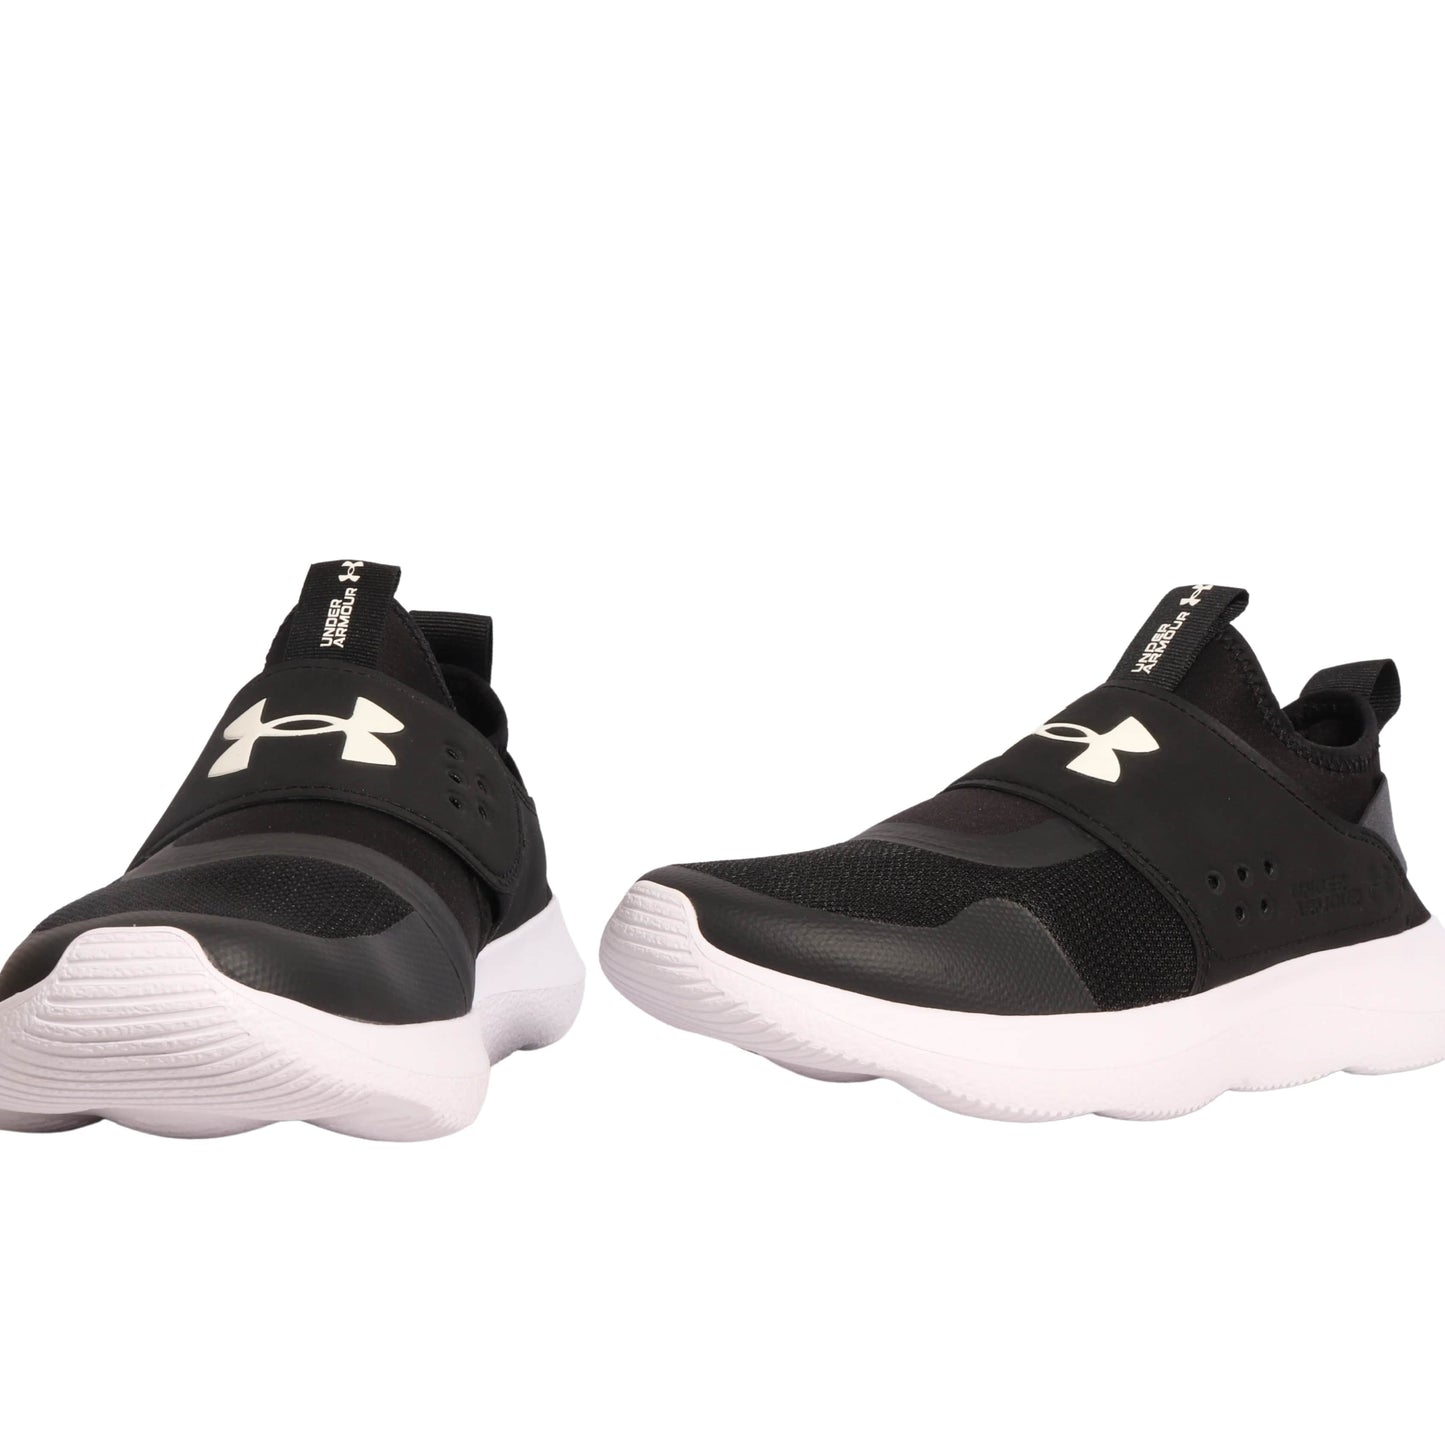 UNDER ARMOUR Athletic Shoes 39 / Black UNDER ARMOUR - Women's UA Runplay Running Shoes